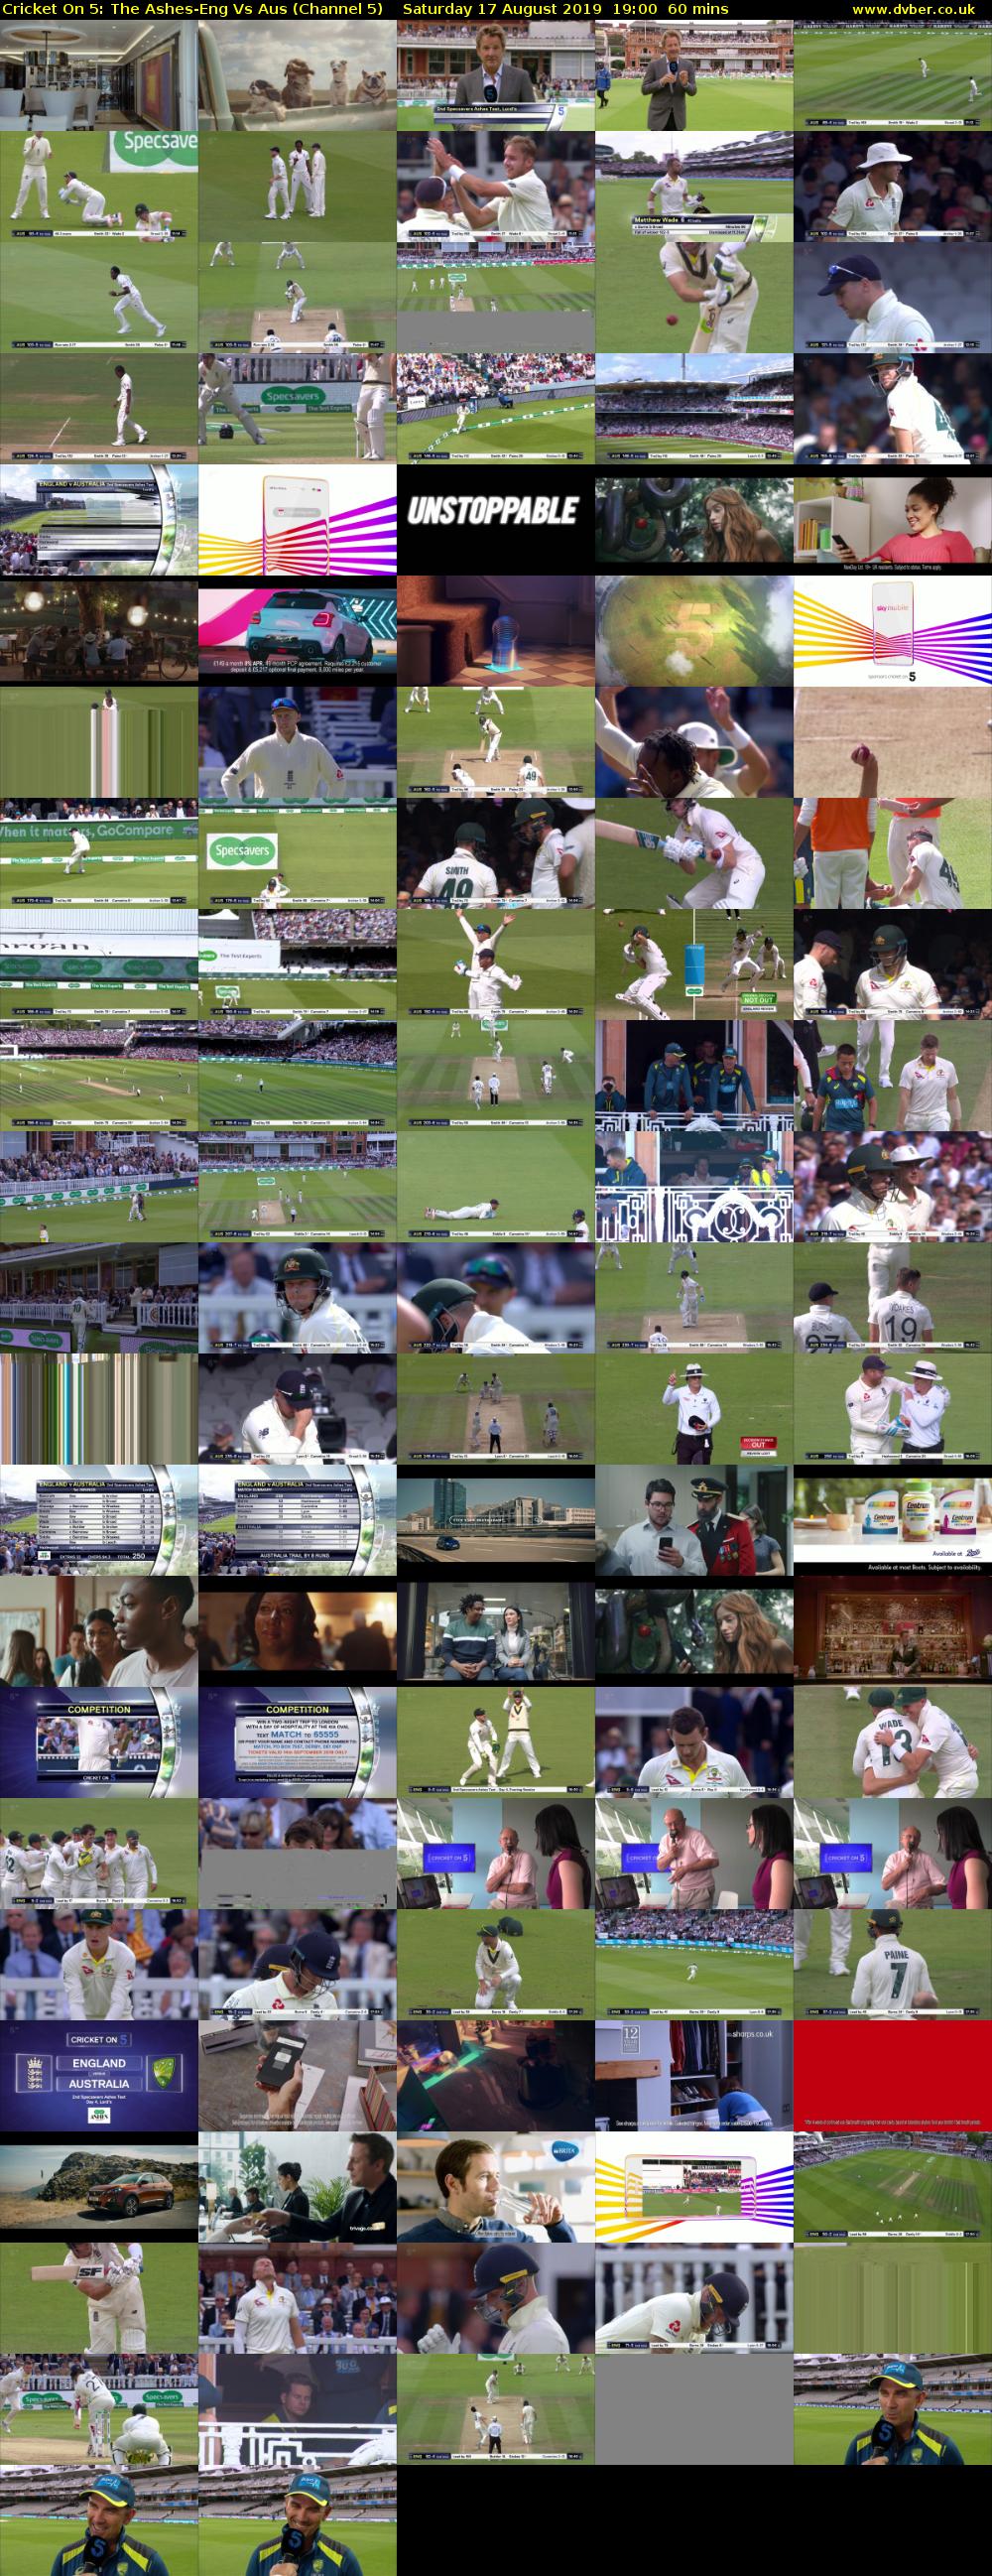 Cricket On 5: The Ashes-Eng Vs Aus (Channel 5) Saturday 17 August 2019 19:00 - 20:00